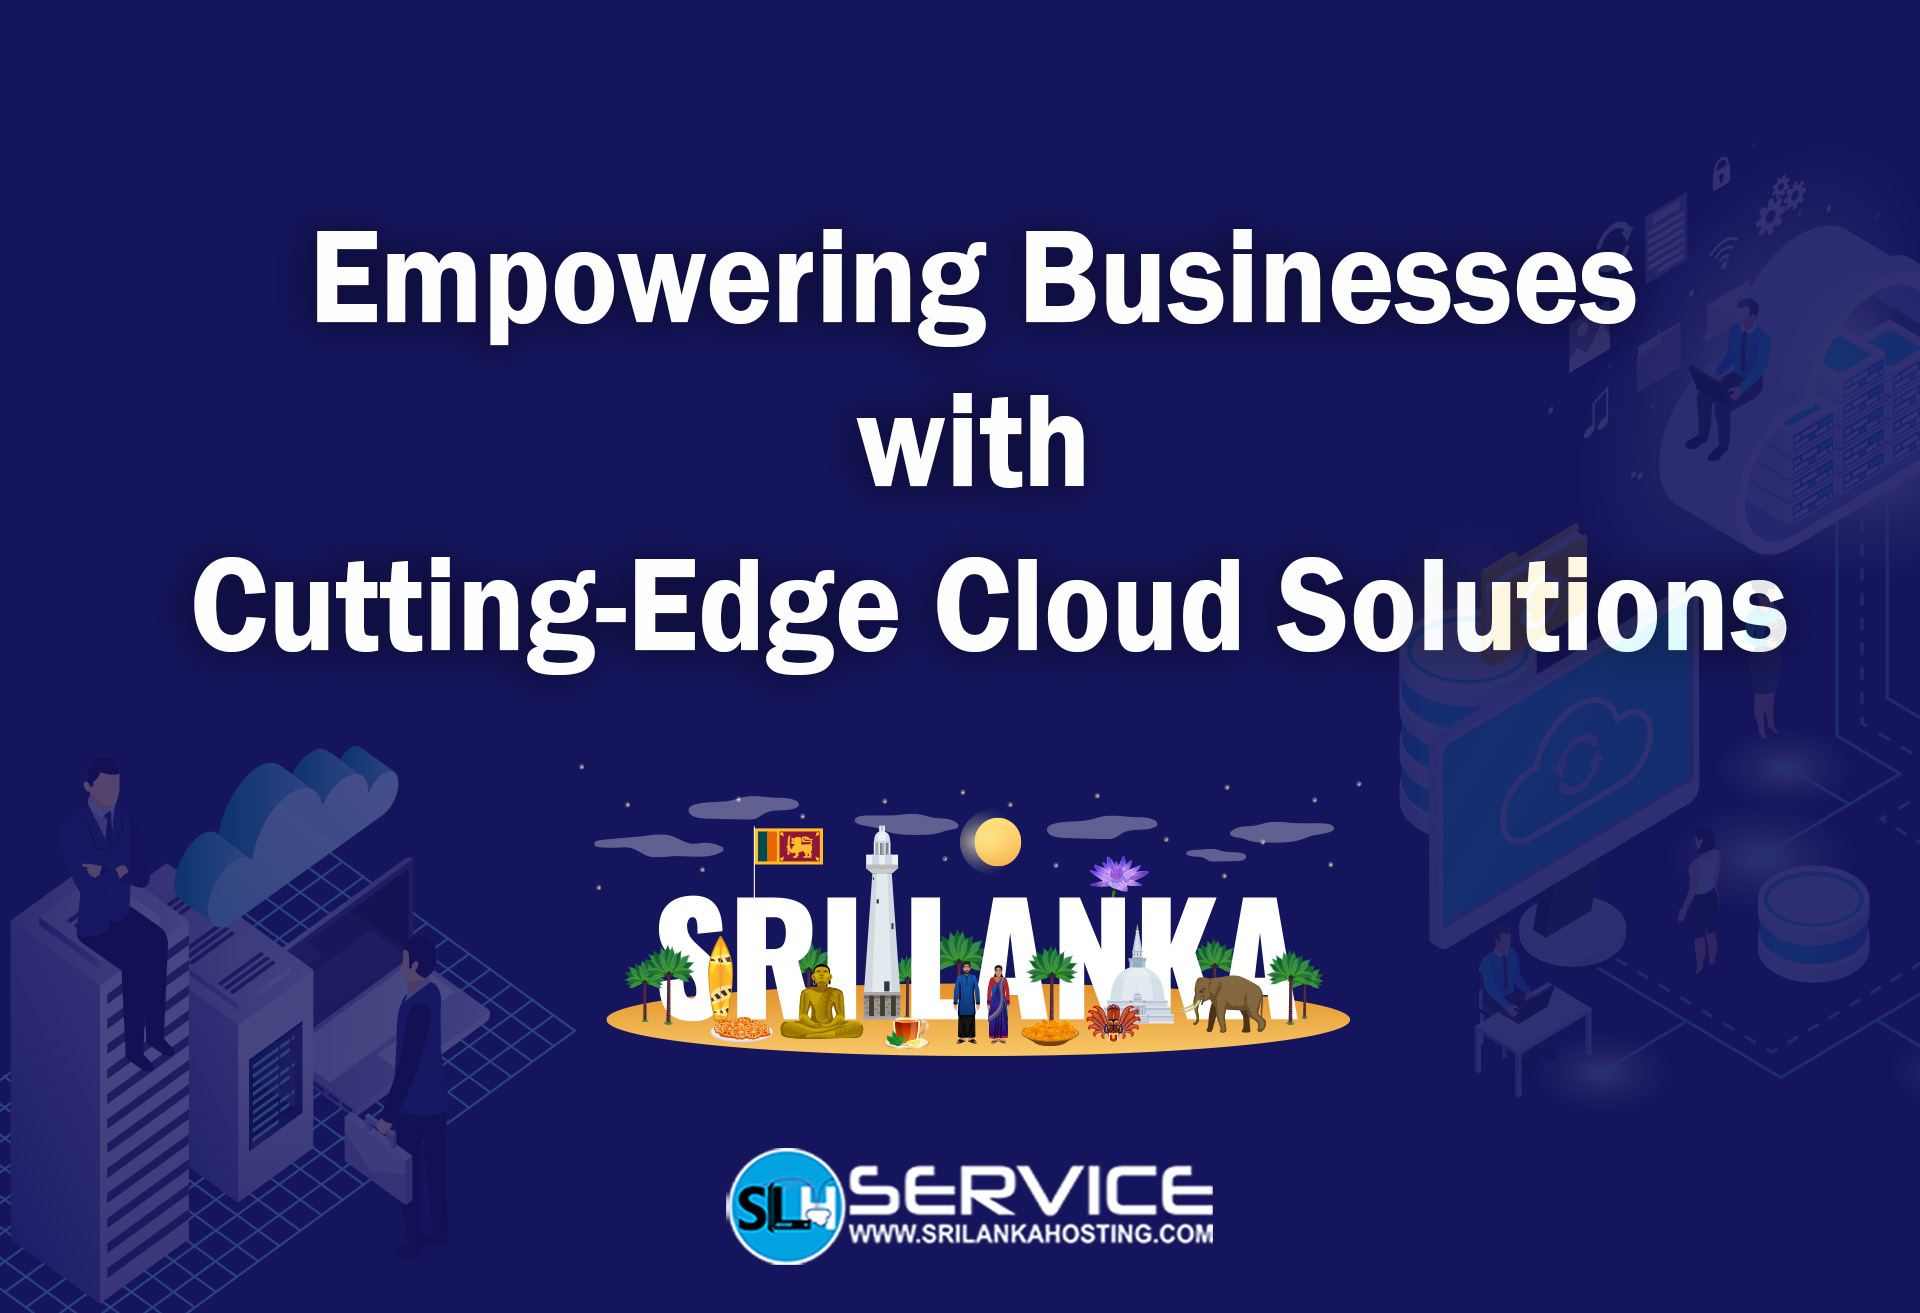 Empowering Businesses with Cutting-Edge Cloud Solutions